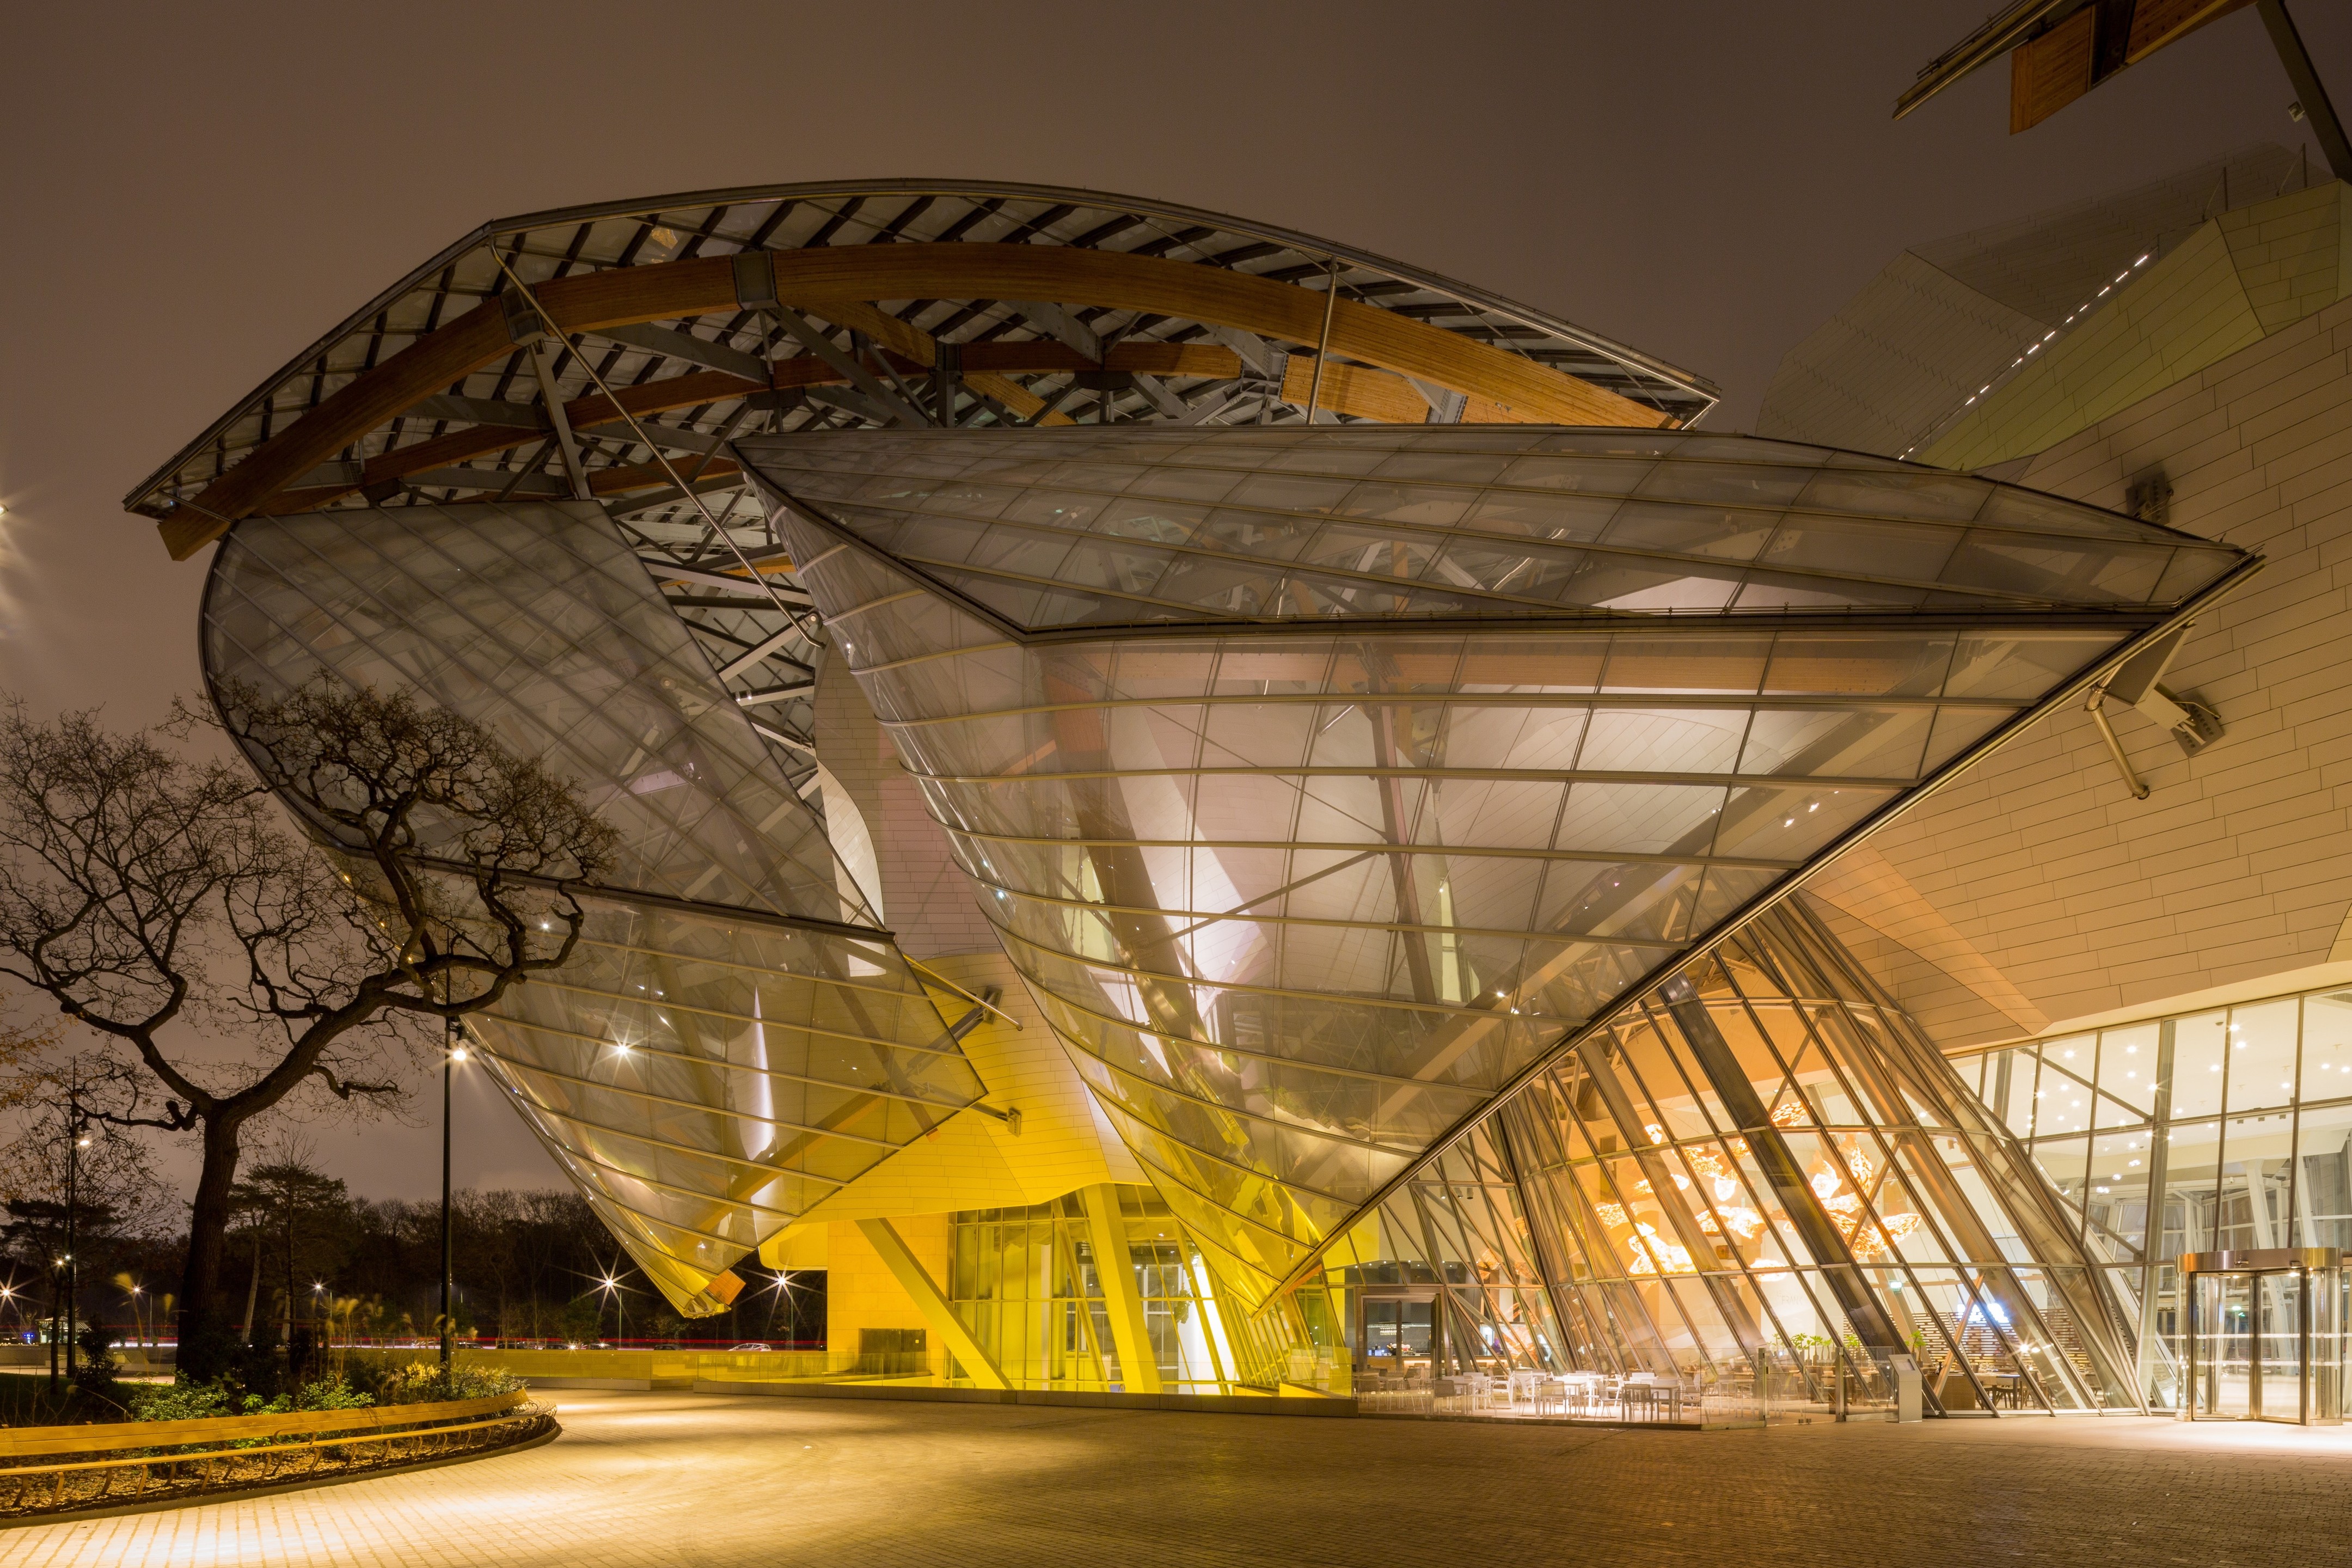 Fondation Louis Vuitton by Frank Gehry